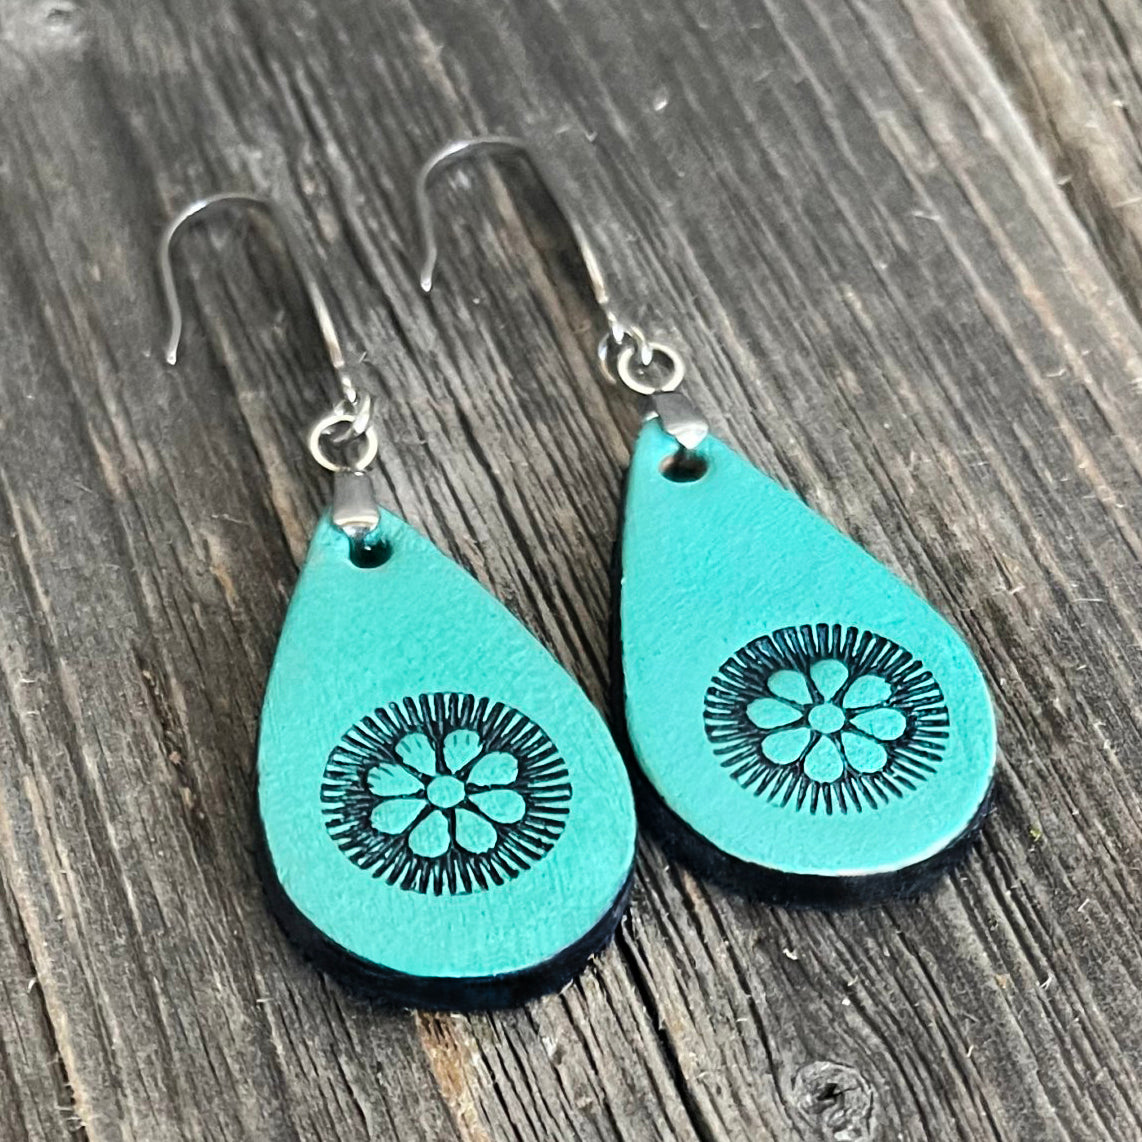 MADE TO ORDER - One of a Kind, genuine leather turquoise/black boho handmade earrings with flower design